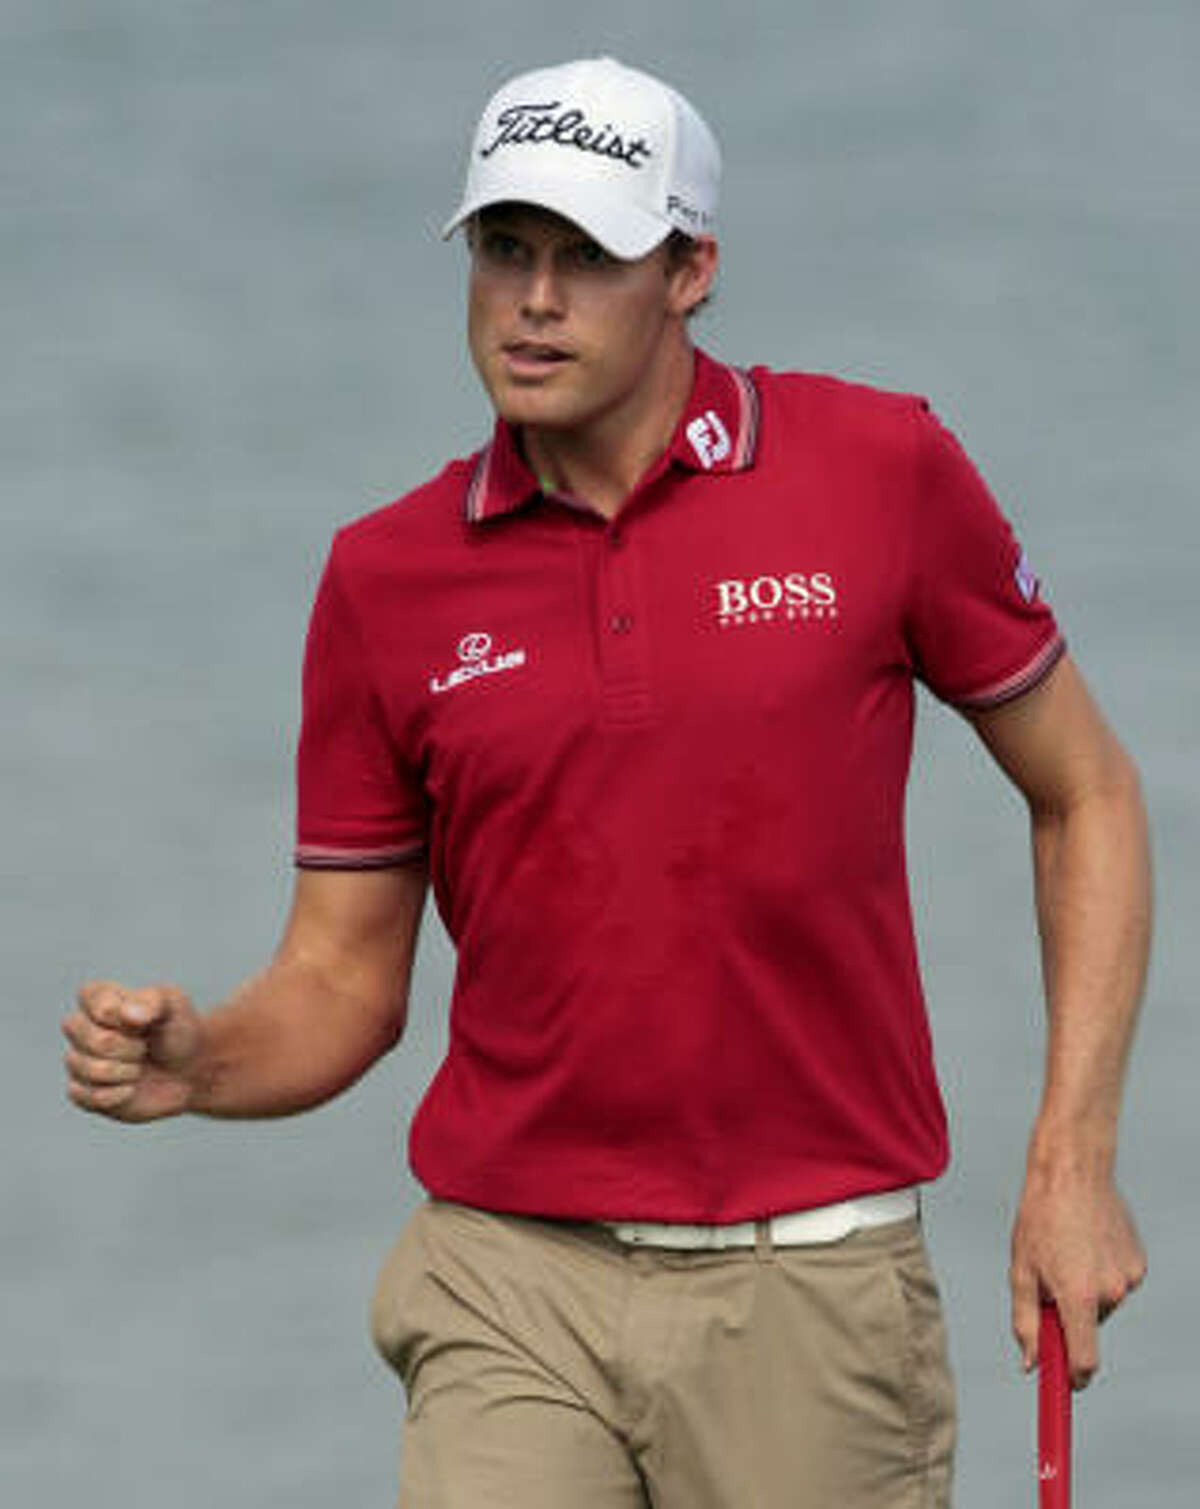 Nick Watney, who grabbed the lead early in the round, reacts after making a birdie putt on the seventh hole.